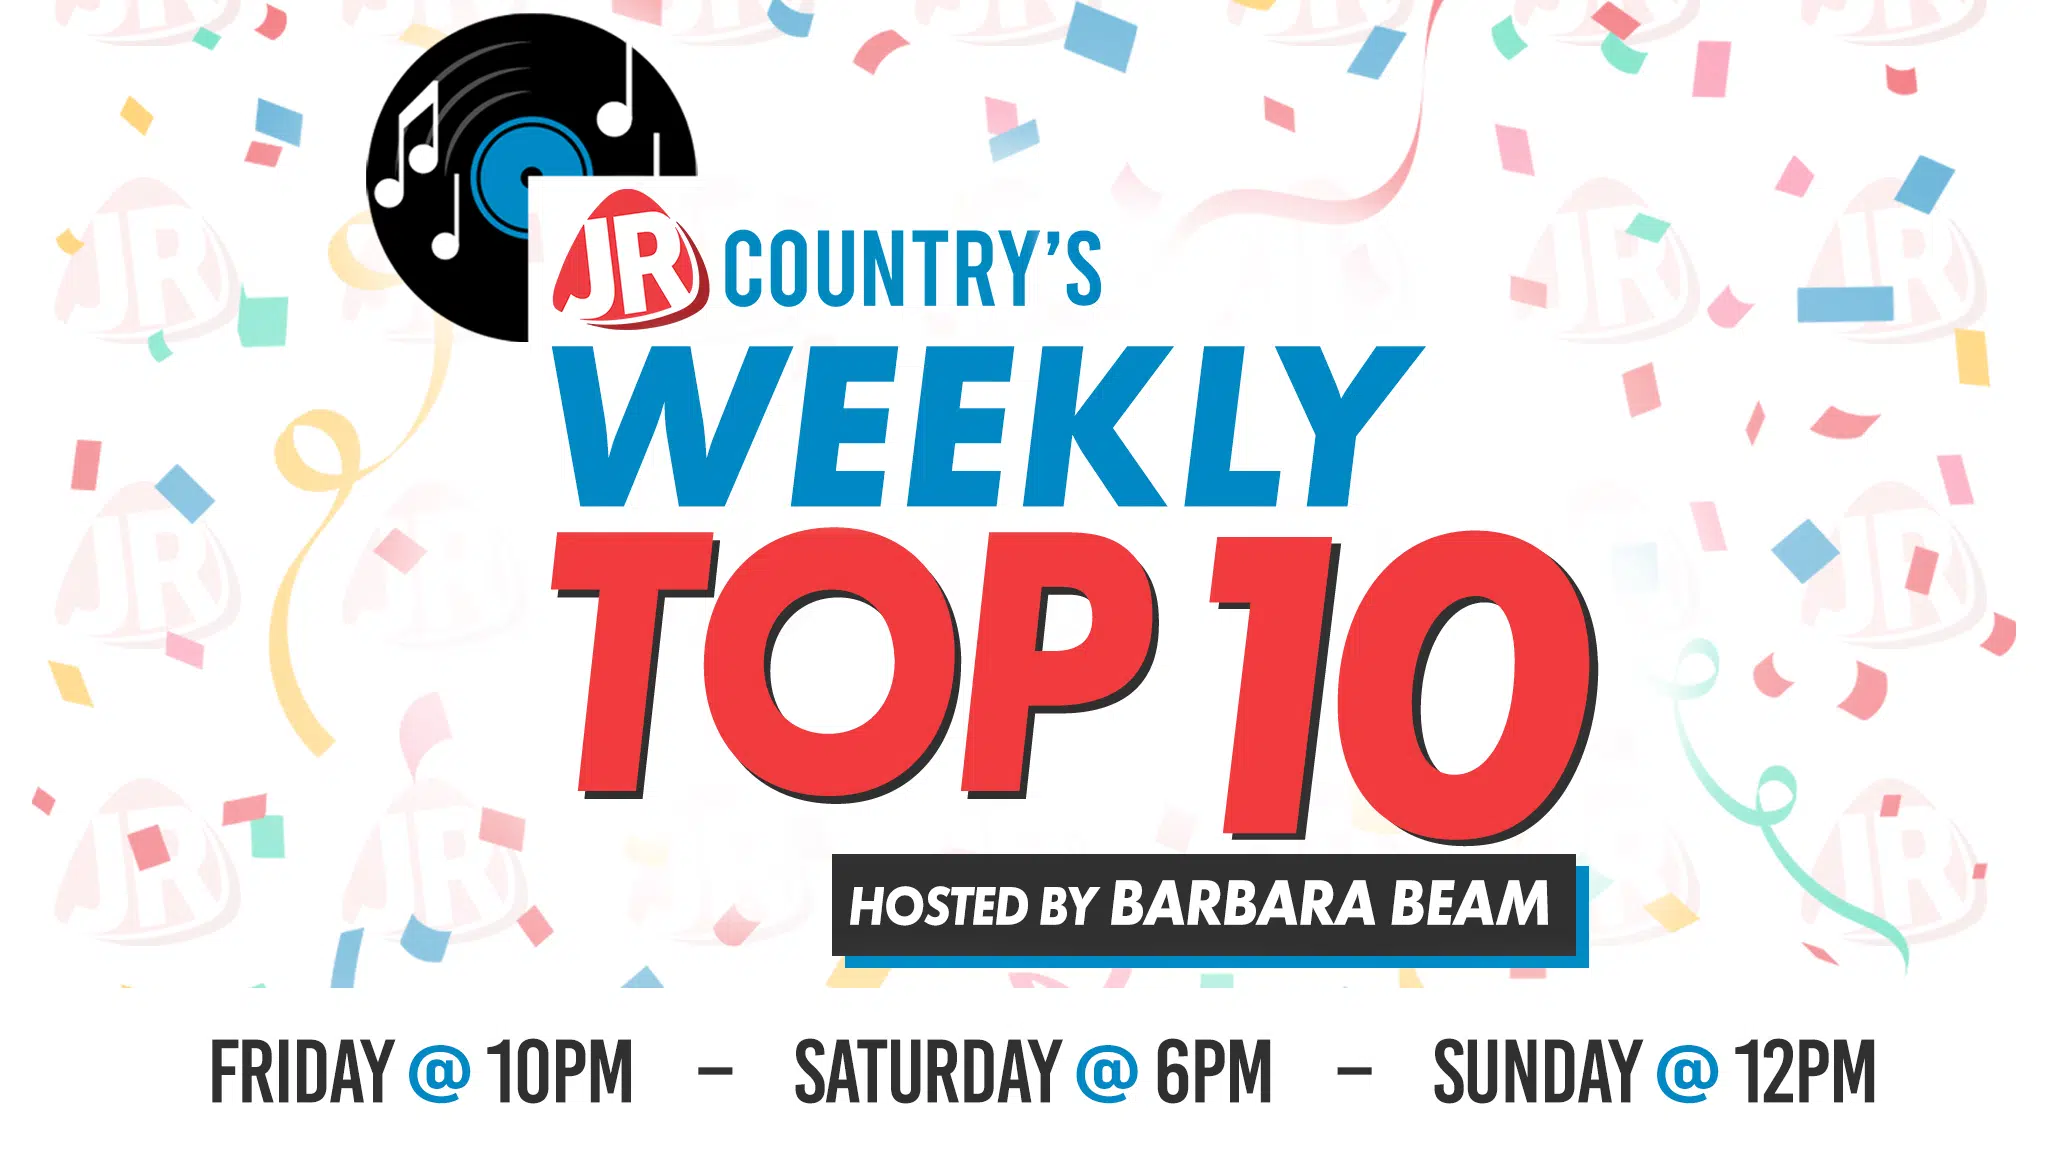 JR Country’s Weekly Top 10